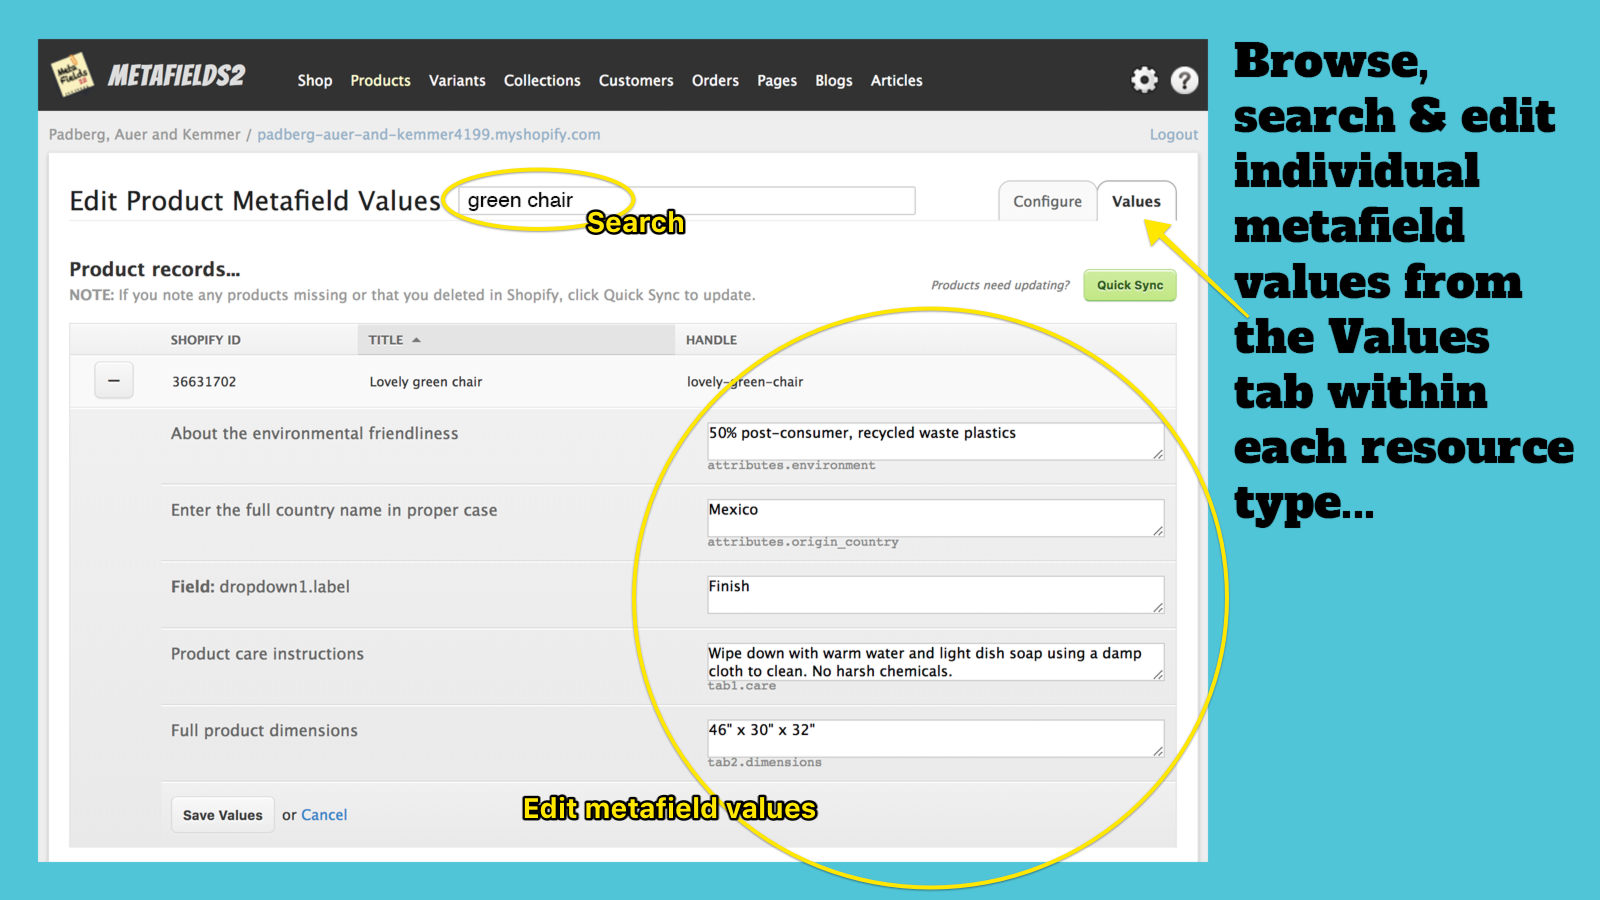 Browse, search & edit individual metafield values